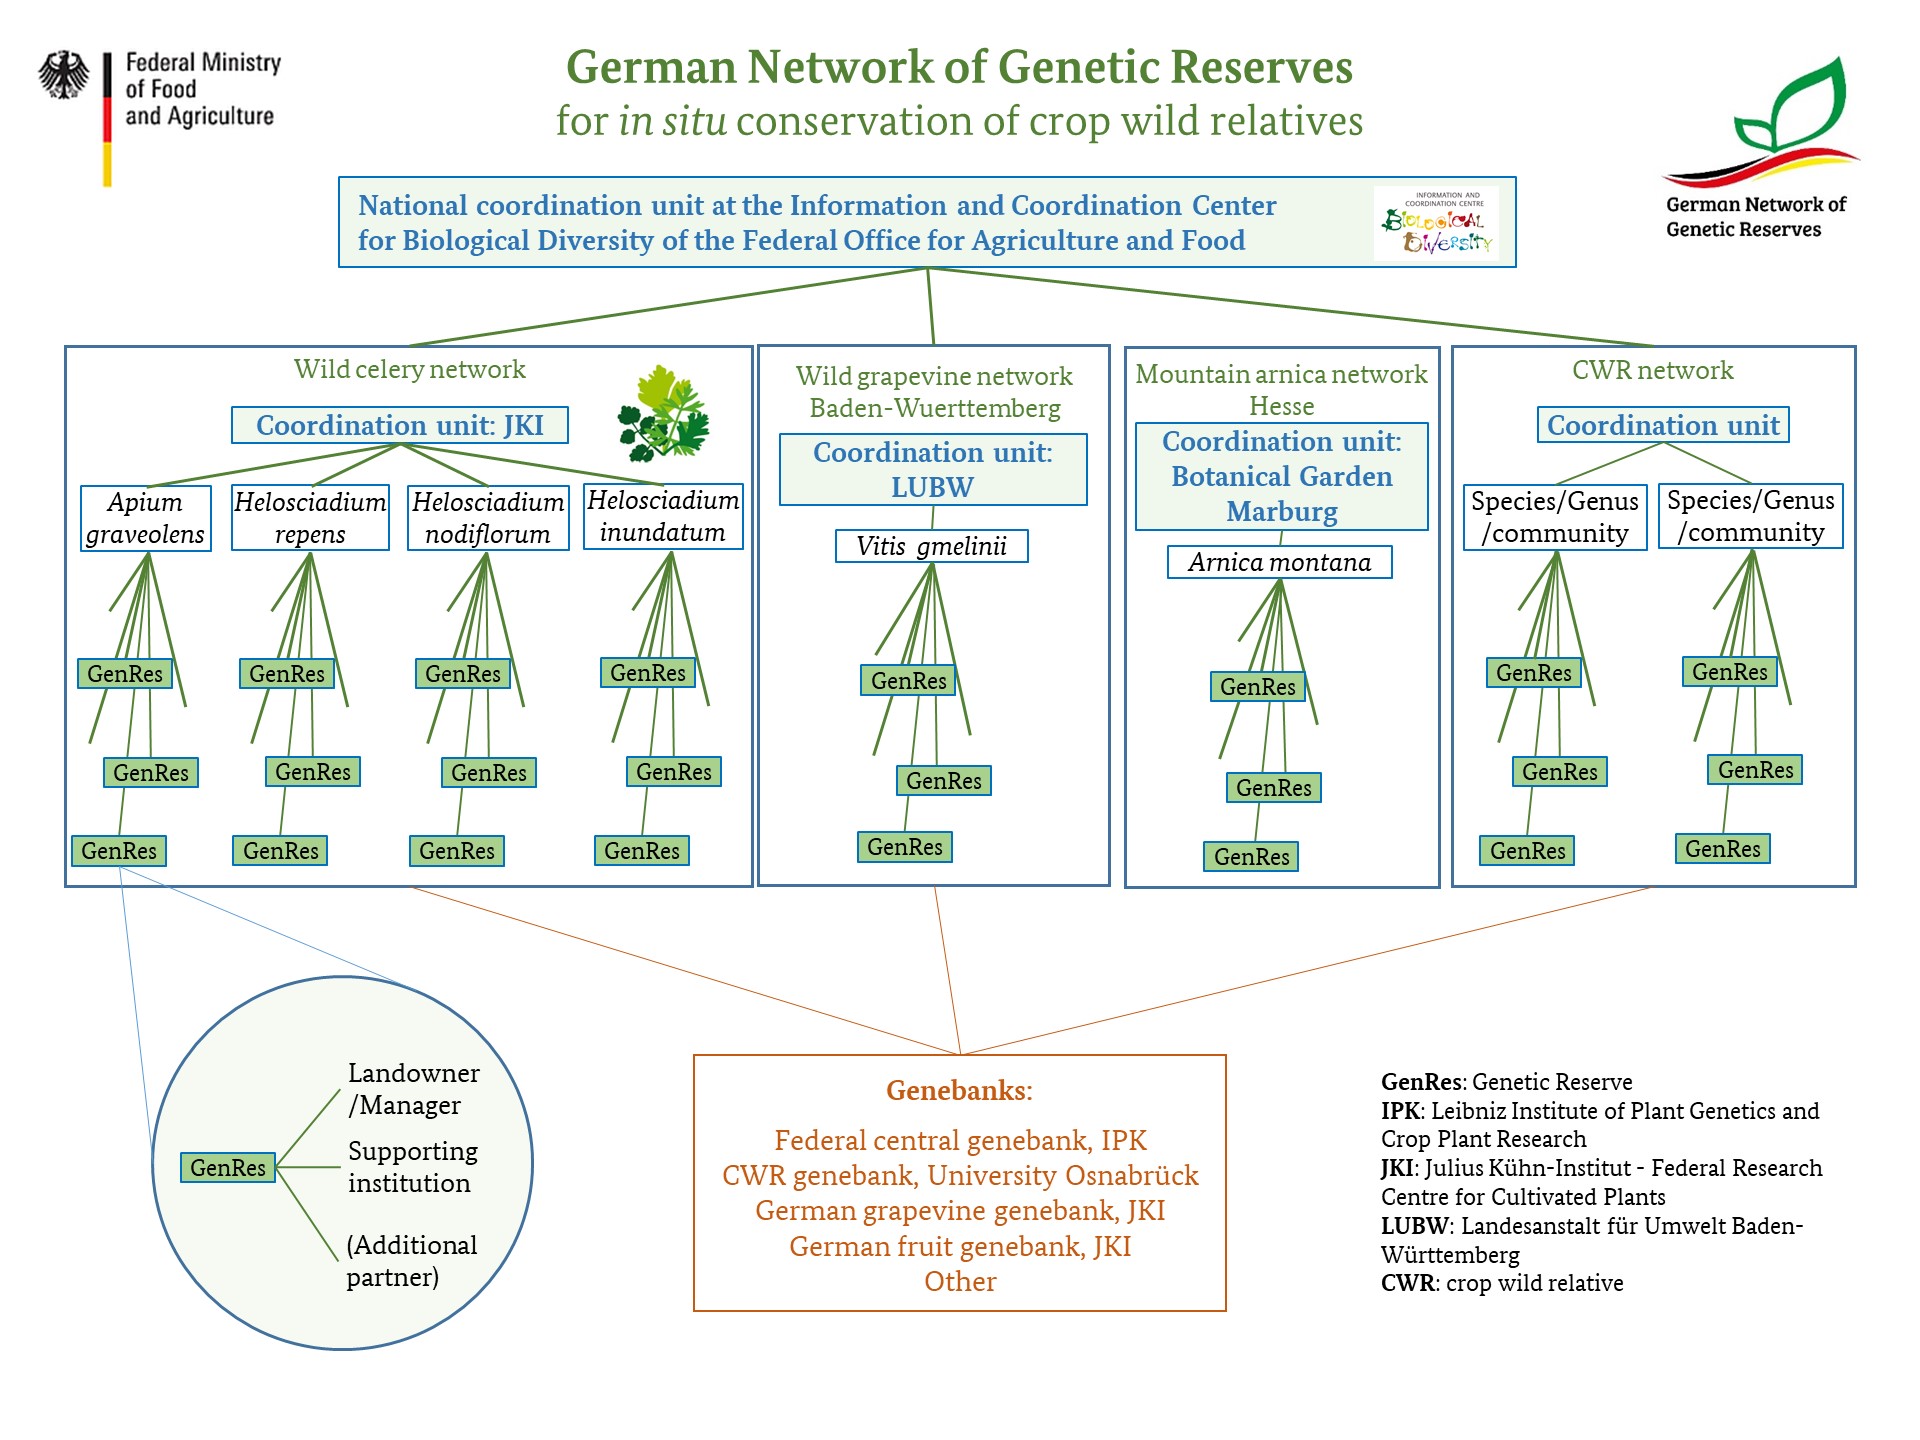 Structure of the Genetic Conservation Areas Network Germany. Mouse click leads to enlarged view.